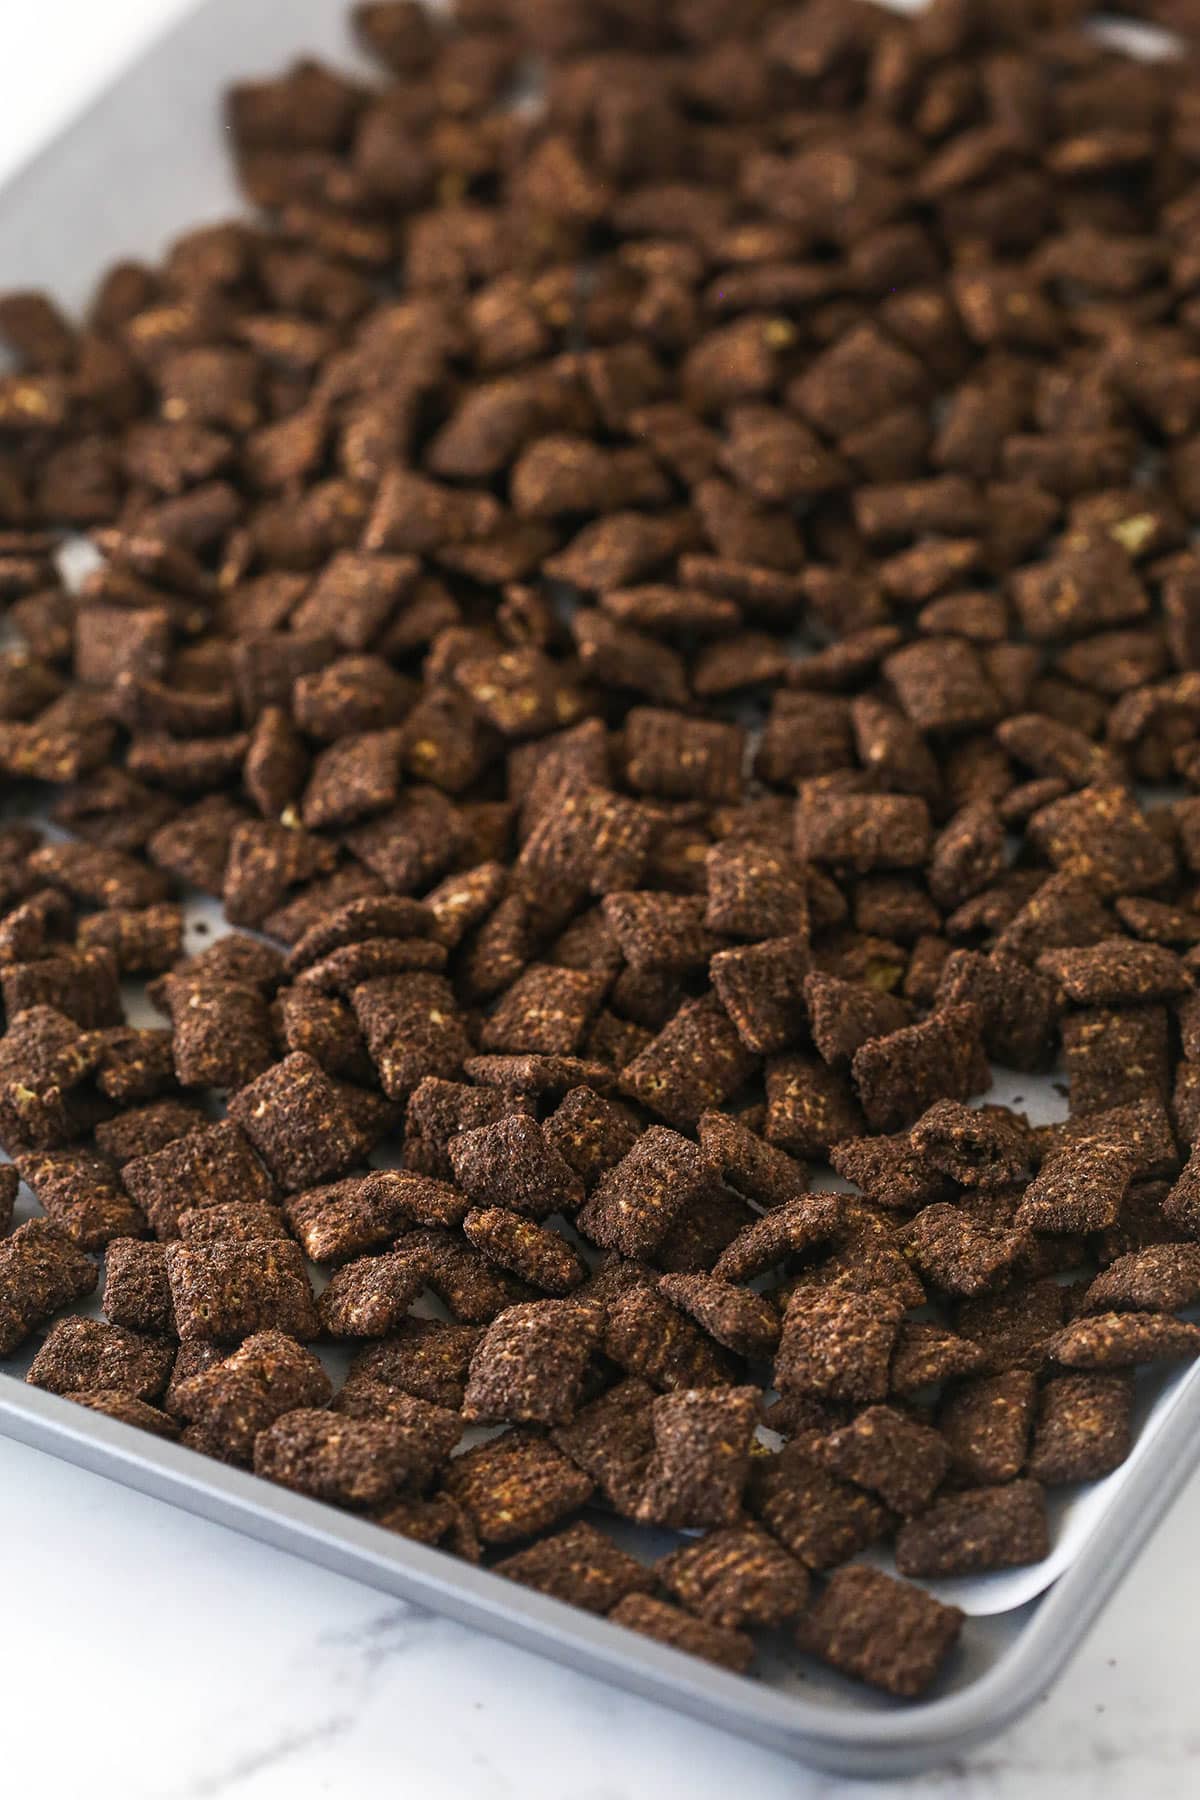 Chocolate covered Chex cereal laid out on a parchment paper-lined baking sheet for Dirt and Worms Puppy Chow.